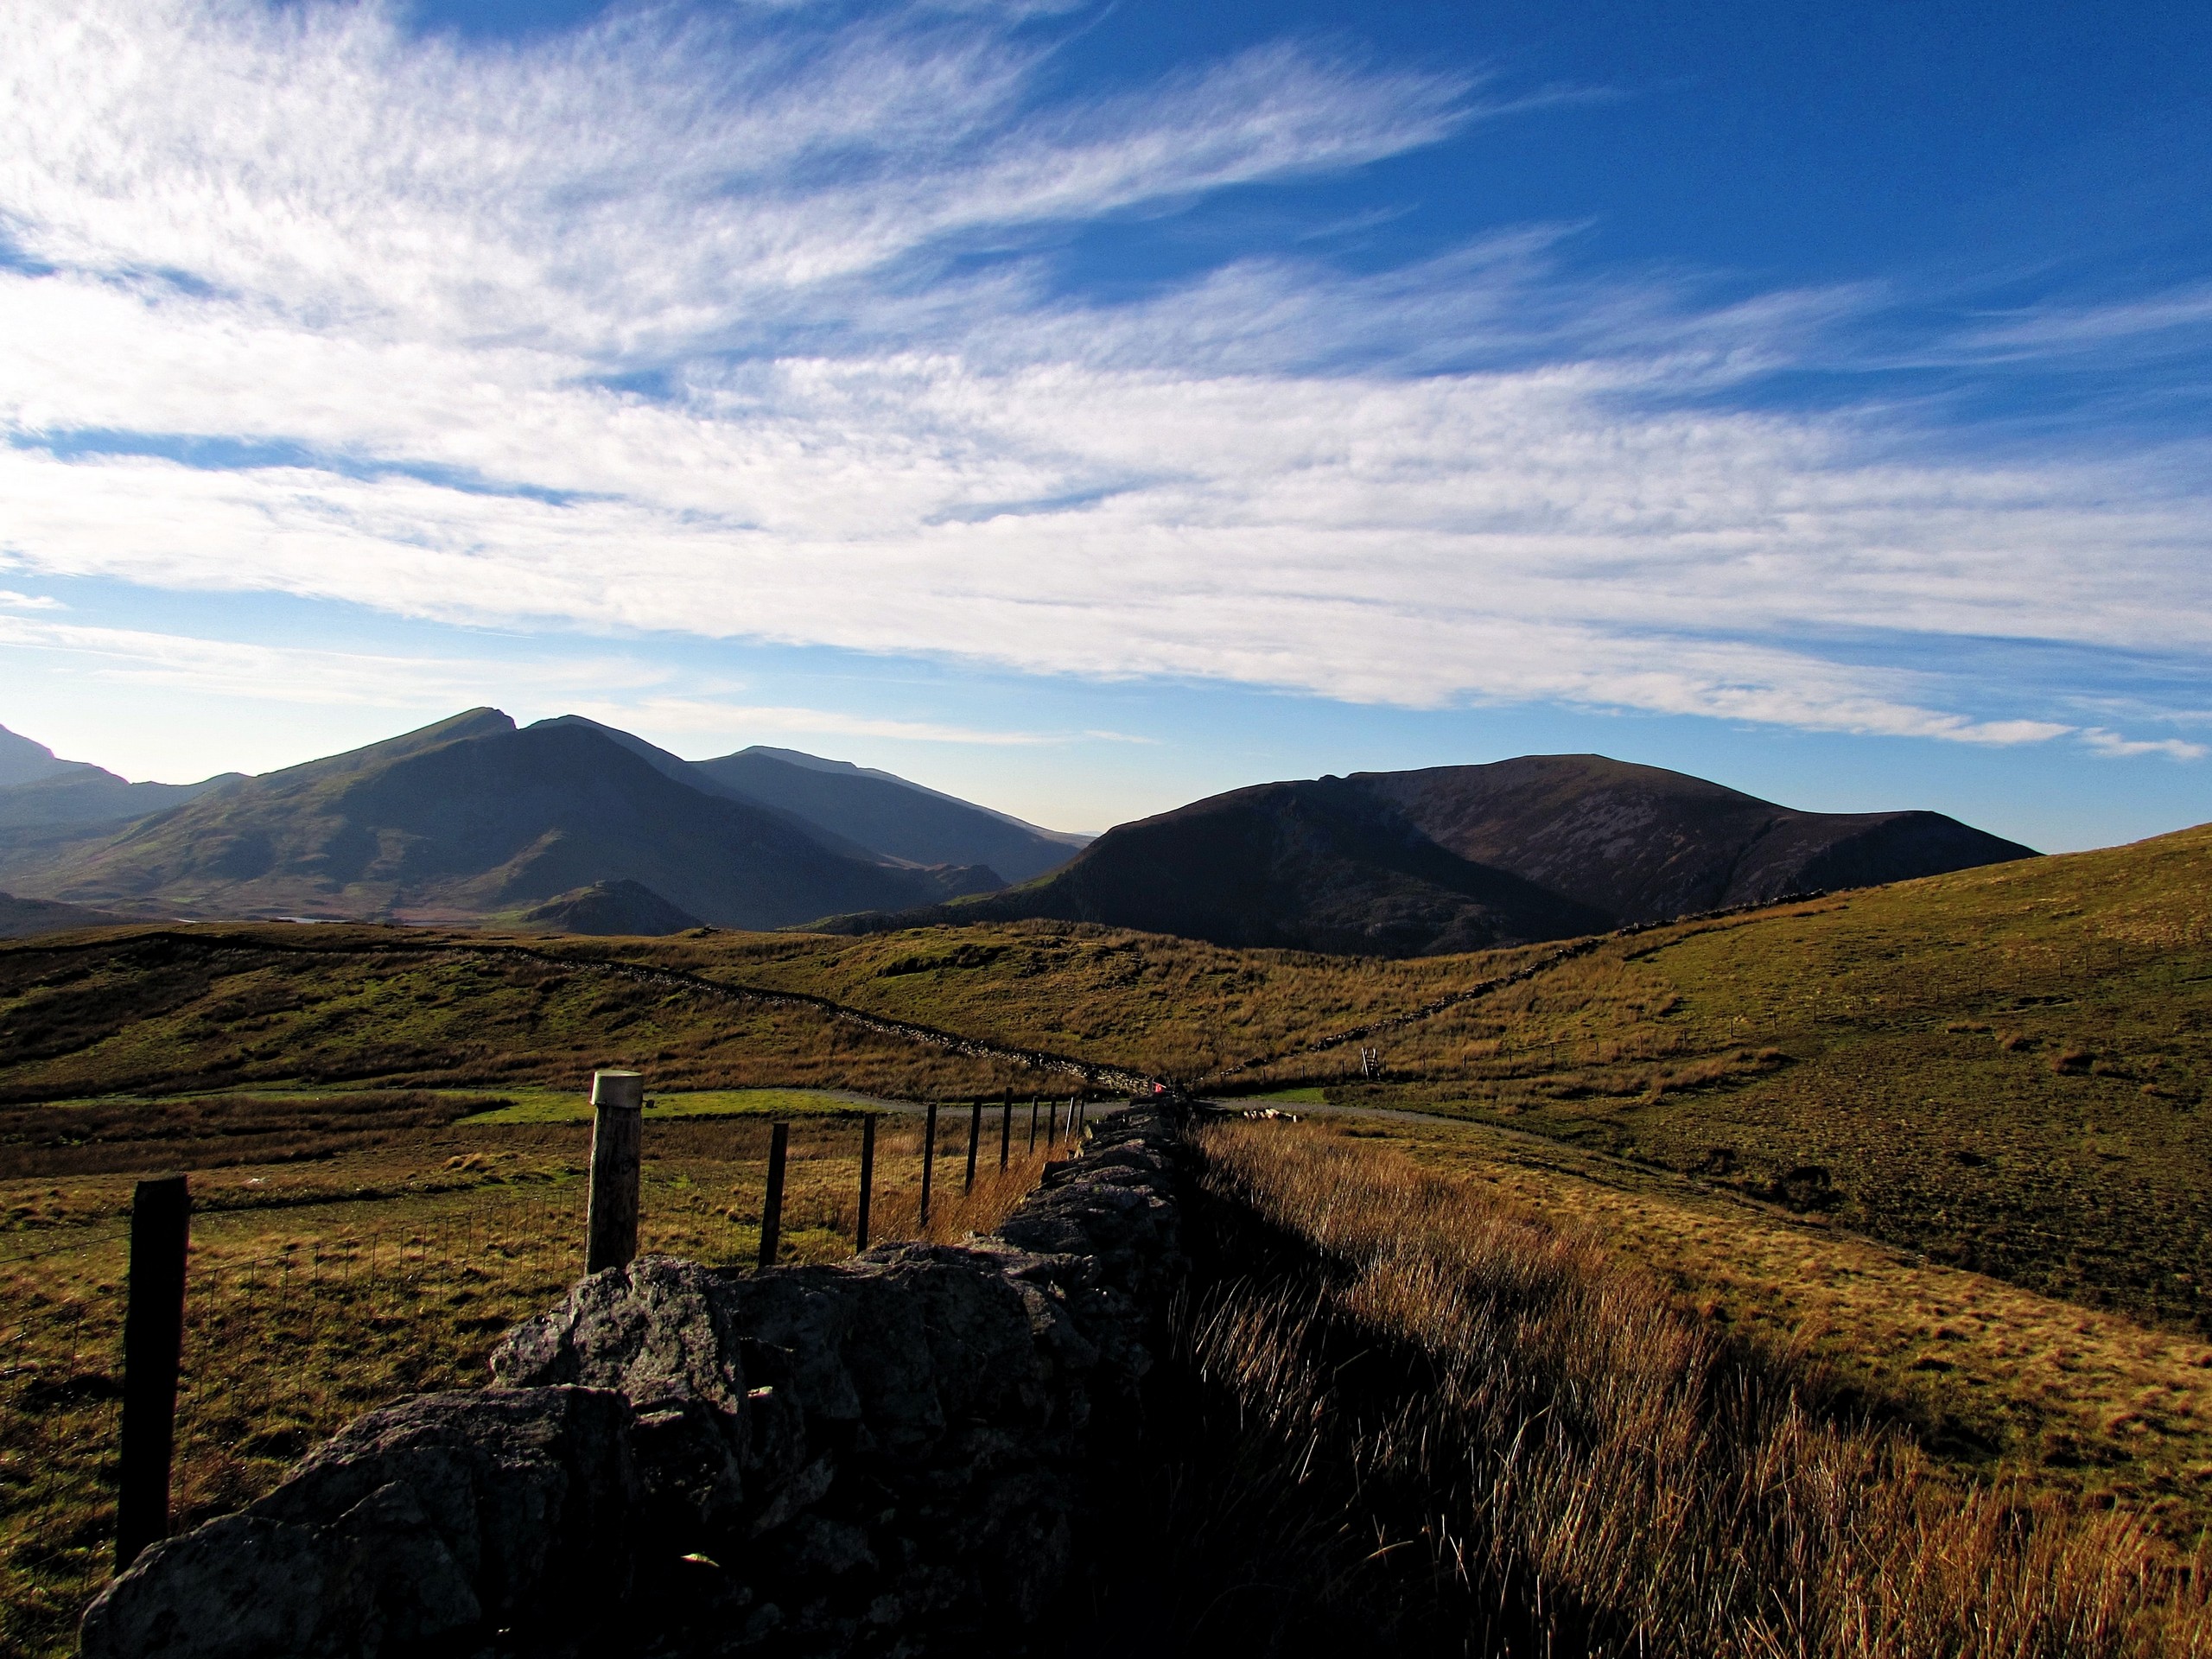 Hilly terrain of the Snowdonian Mountains